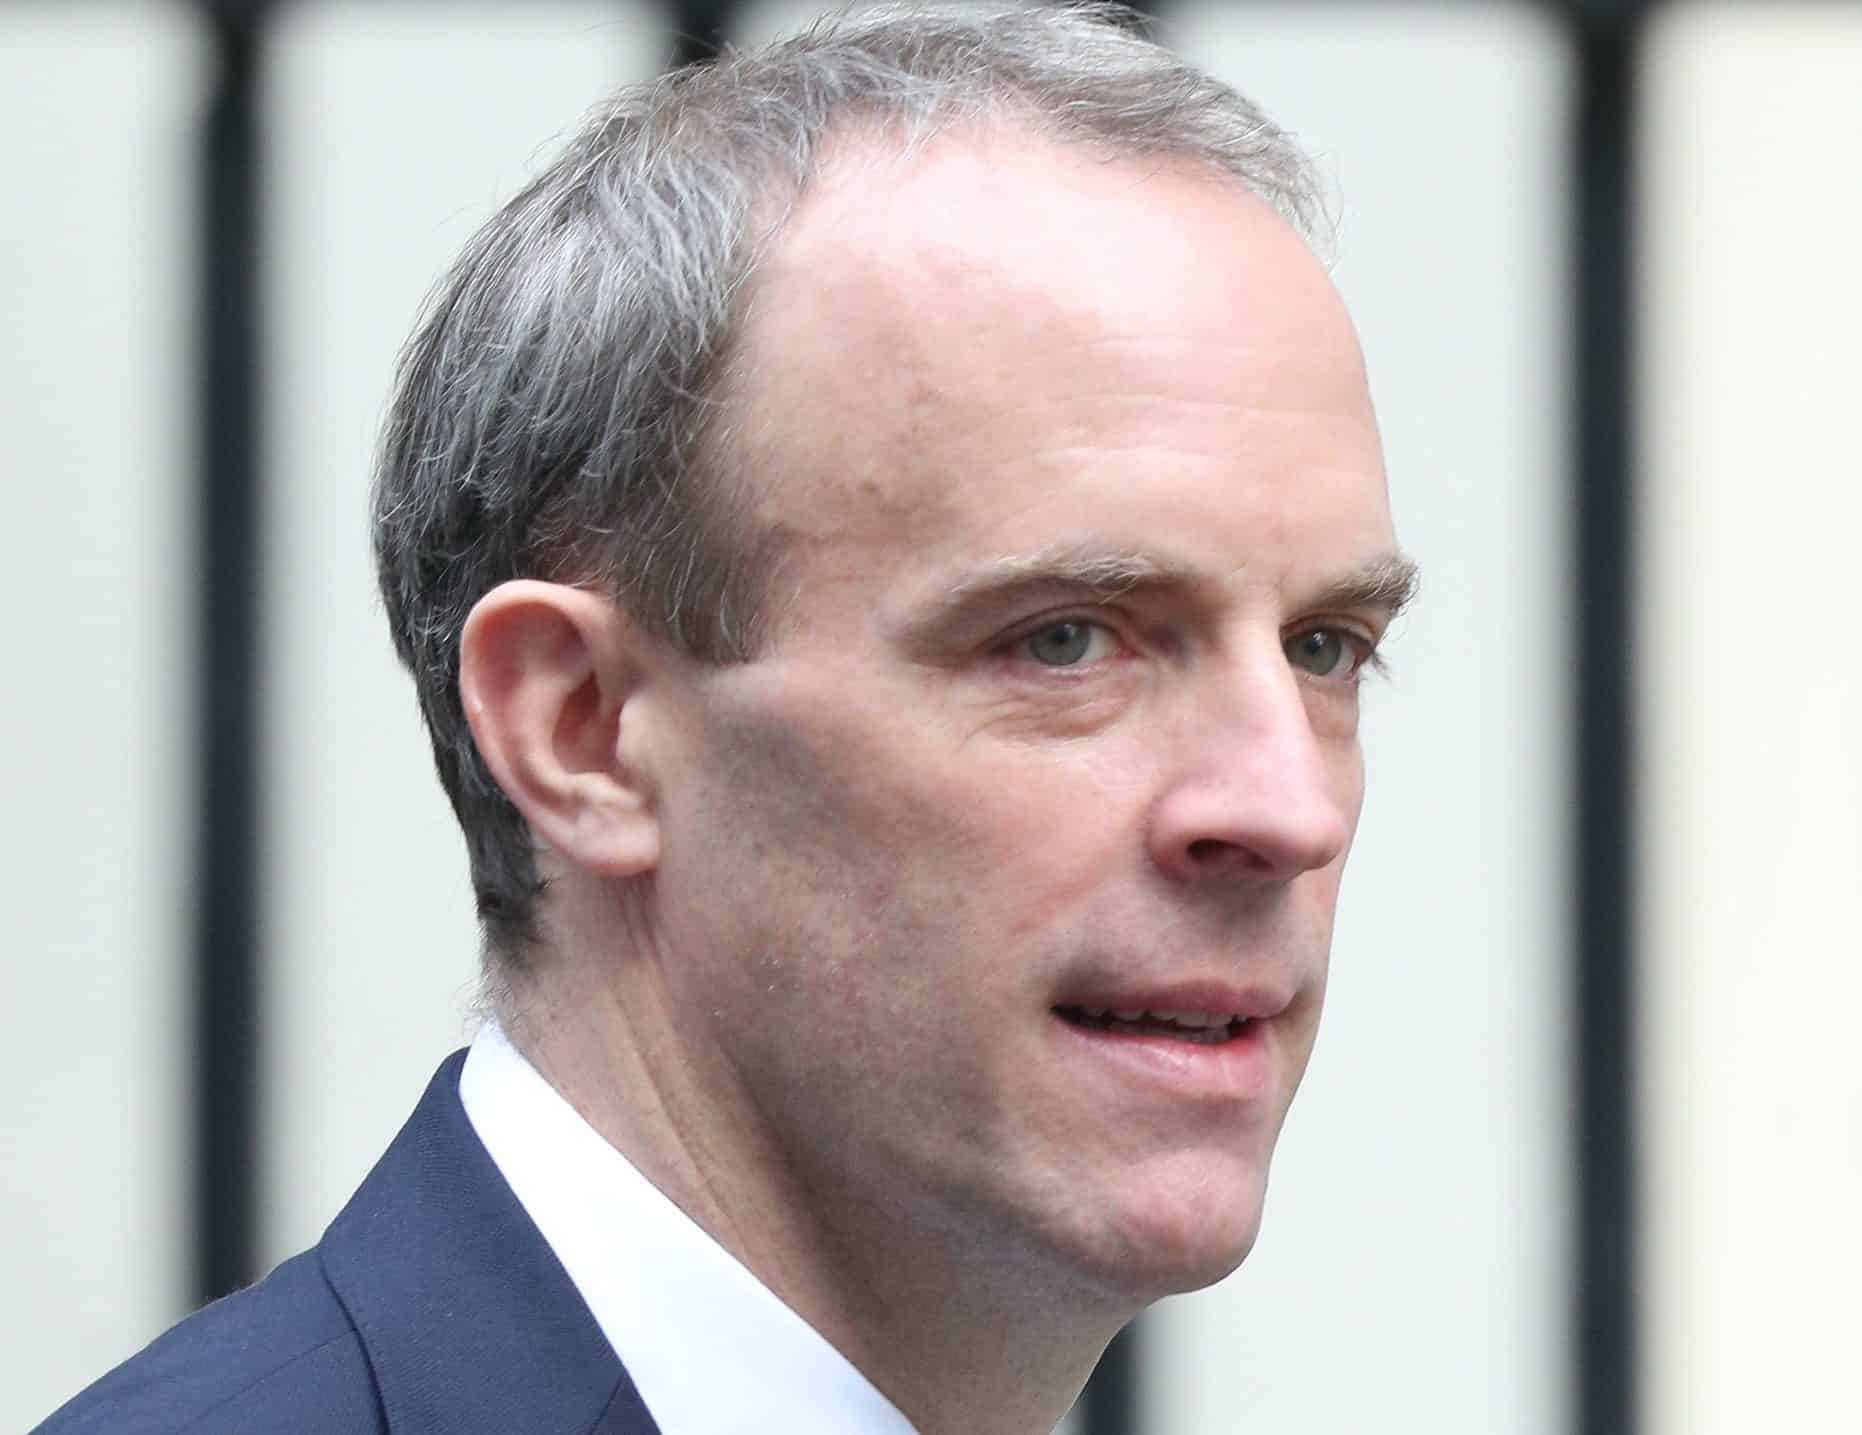 ‘Irresponsible:’ Raab slammed over plans to replace Human Rights Act